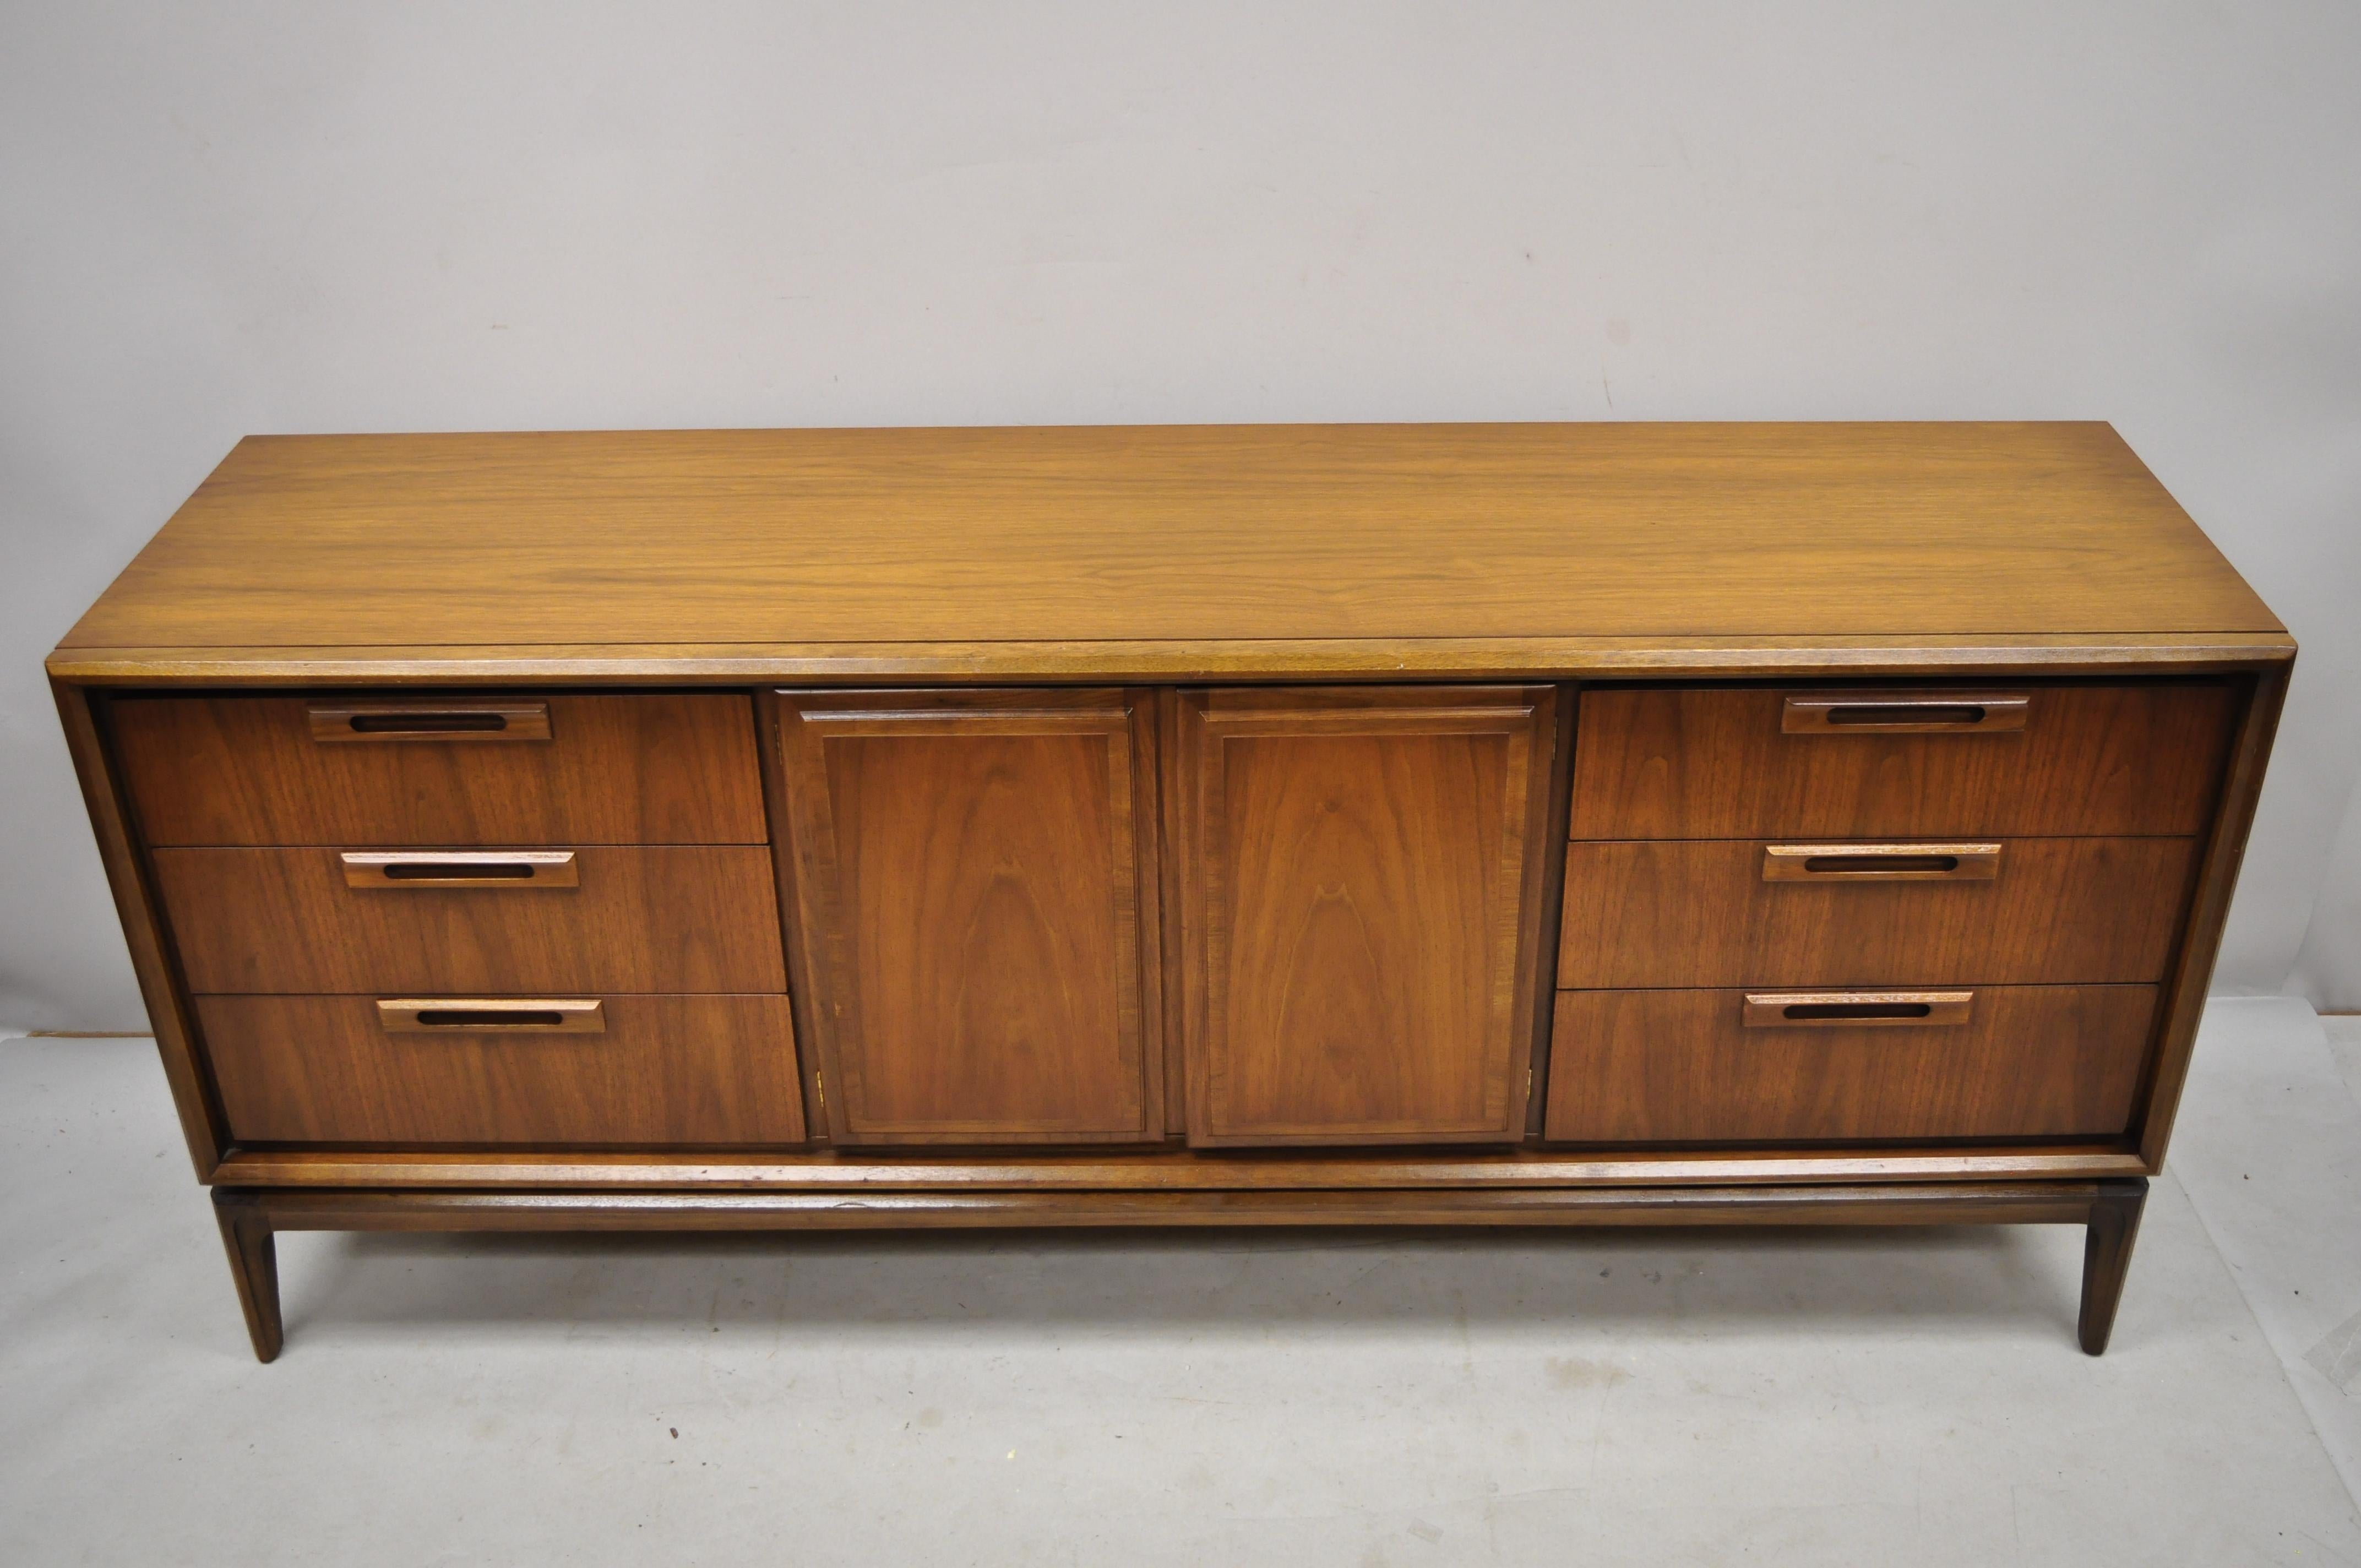 Vintage Mid-Century Modern walnut 9-drawer long dresser credenza by Randall house. Item features beautiful wood grain, 2 swing doors, original label, 9 dovetailed drawers, tapered legs, clean modernist lines, quality American craftsmanship, circa